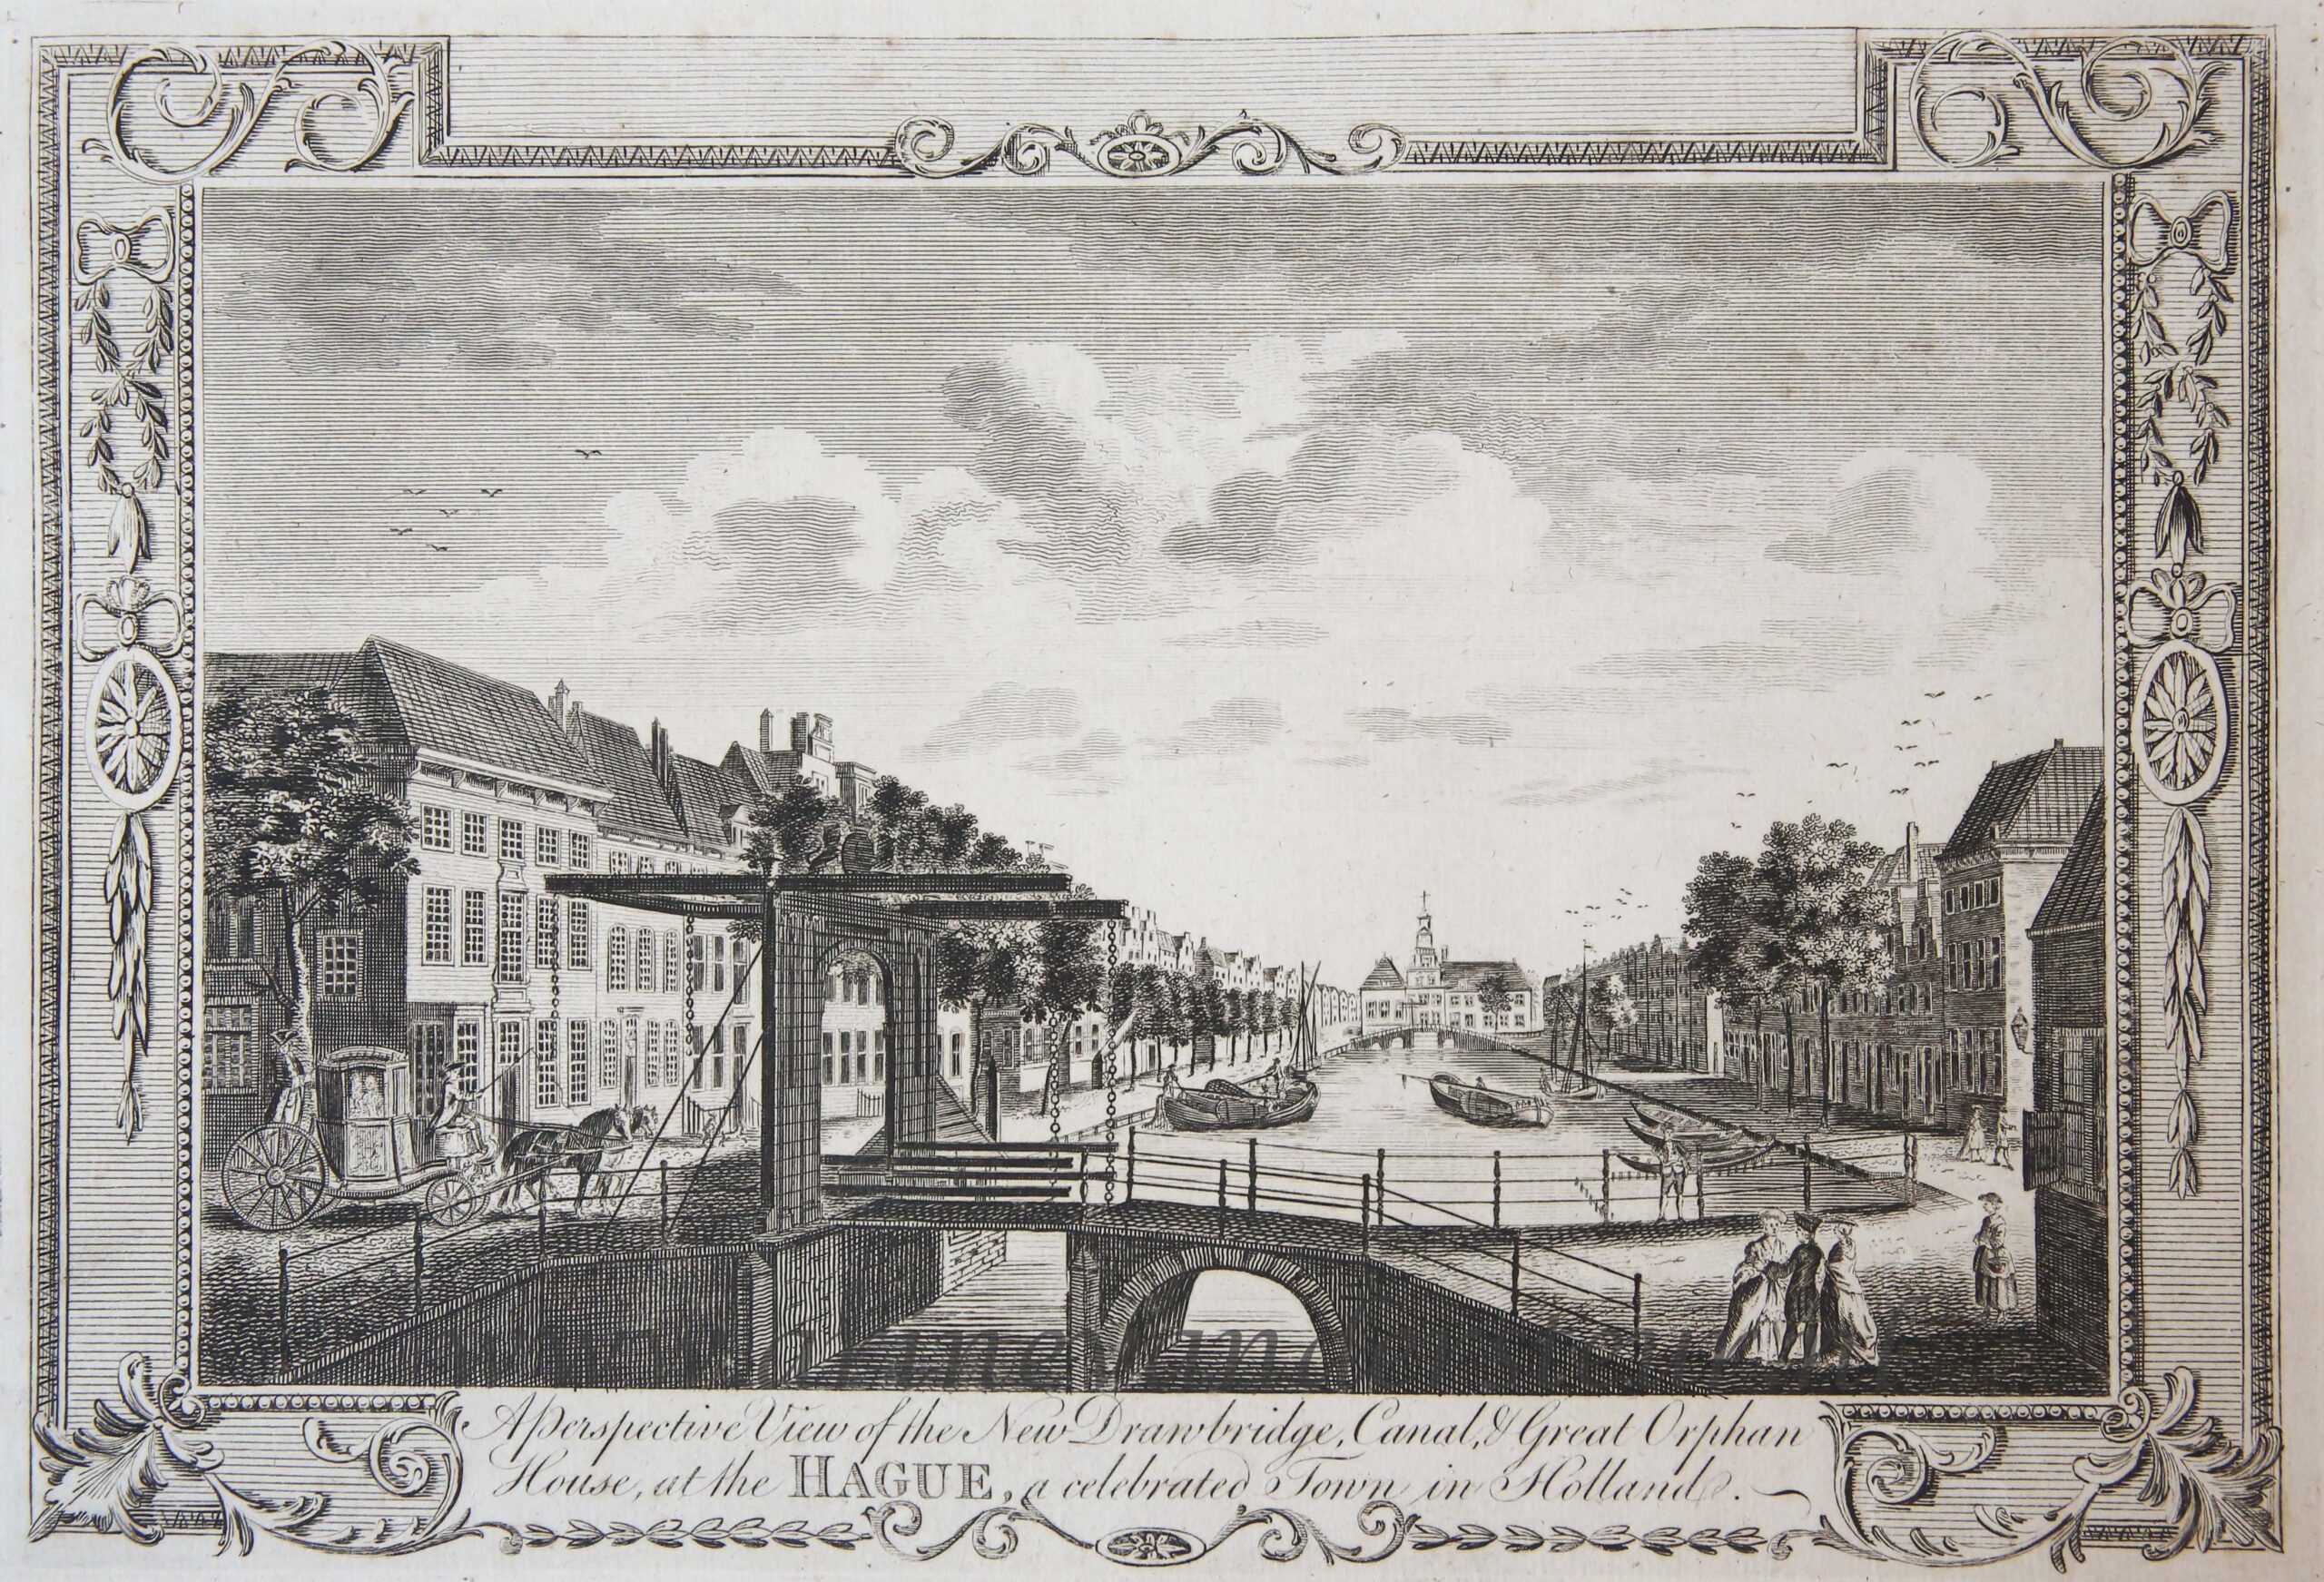  - [Antique print, etching] A Perspective View of the New Drawbridge Canal and Great Orphan House at The HAGUE a celebrated Town in Holland (Bierkade Den Haag), published 1782.